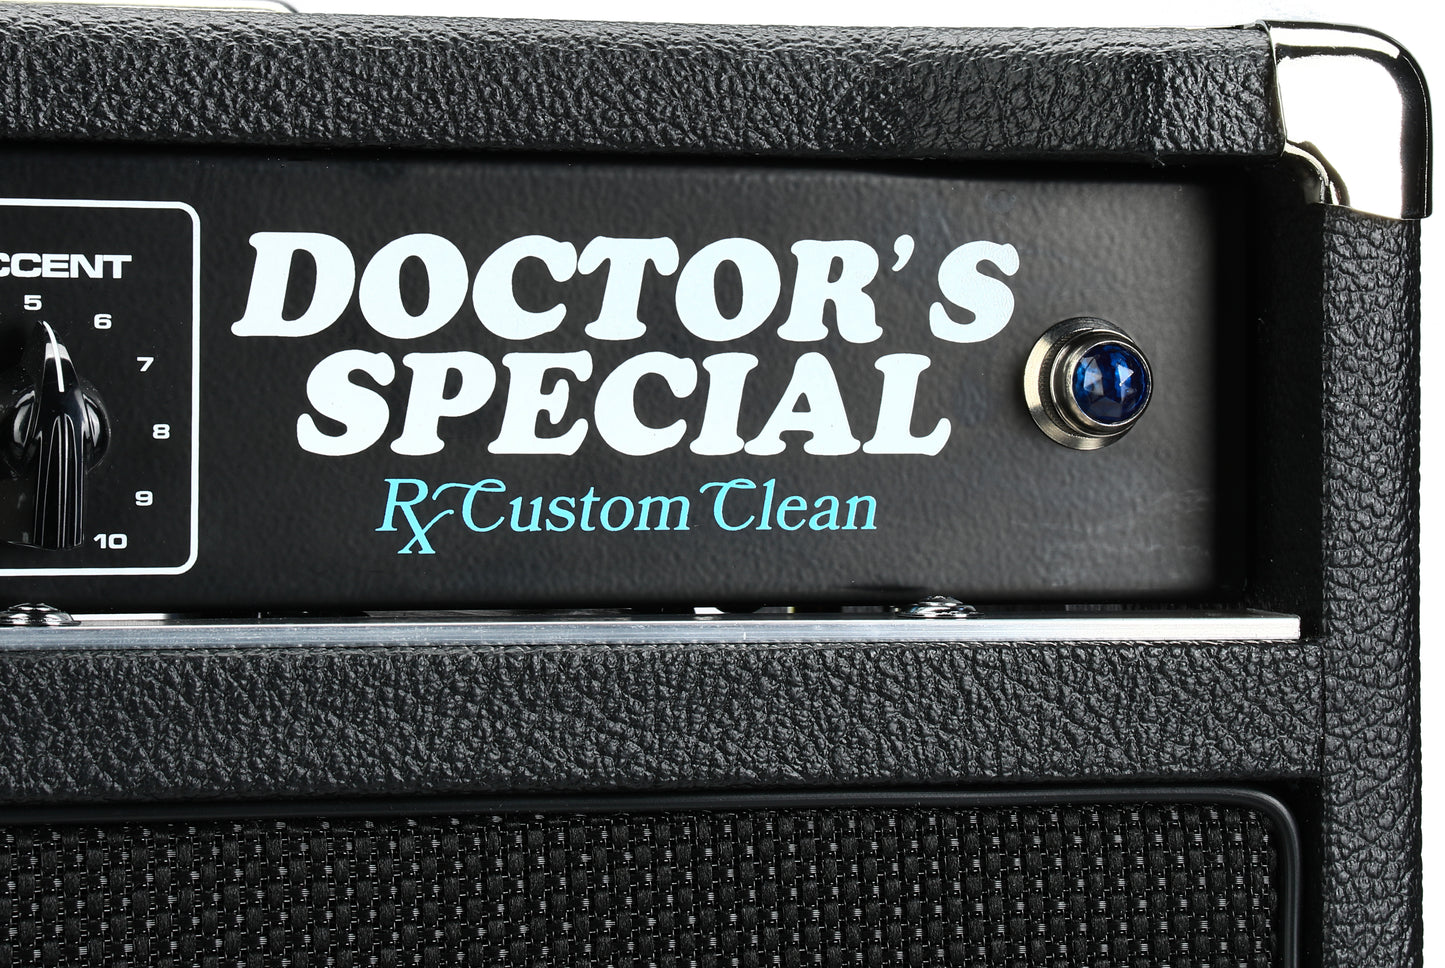 The Doctor's Special RX Custom Clean